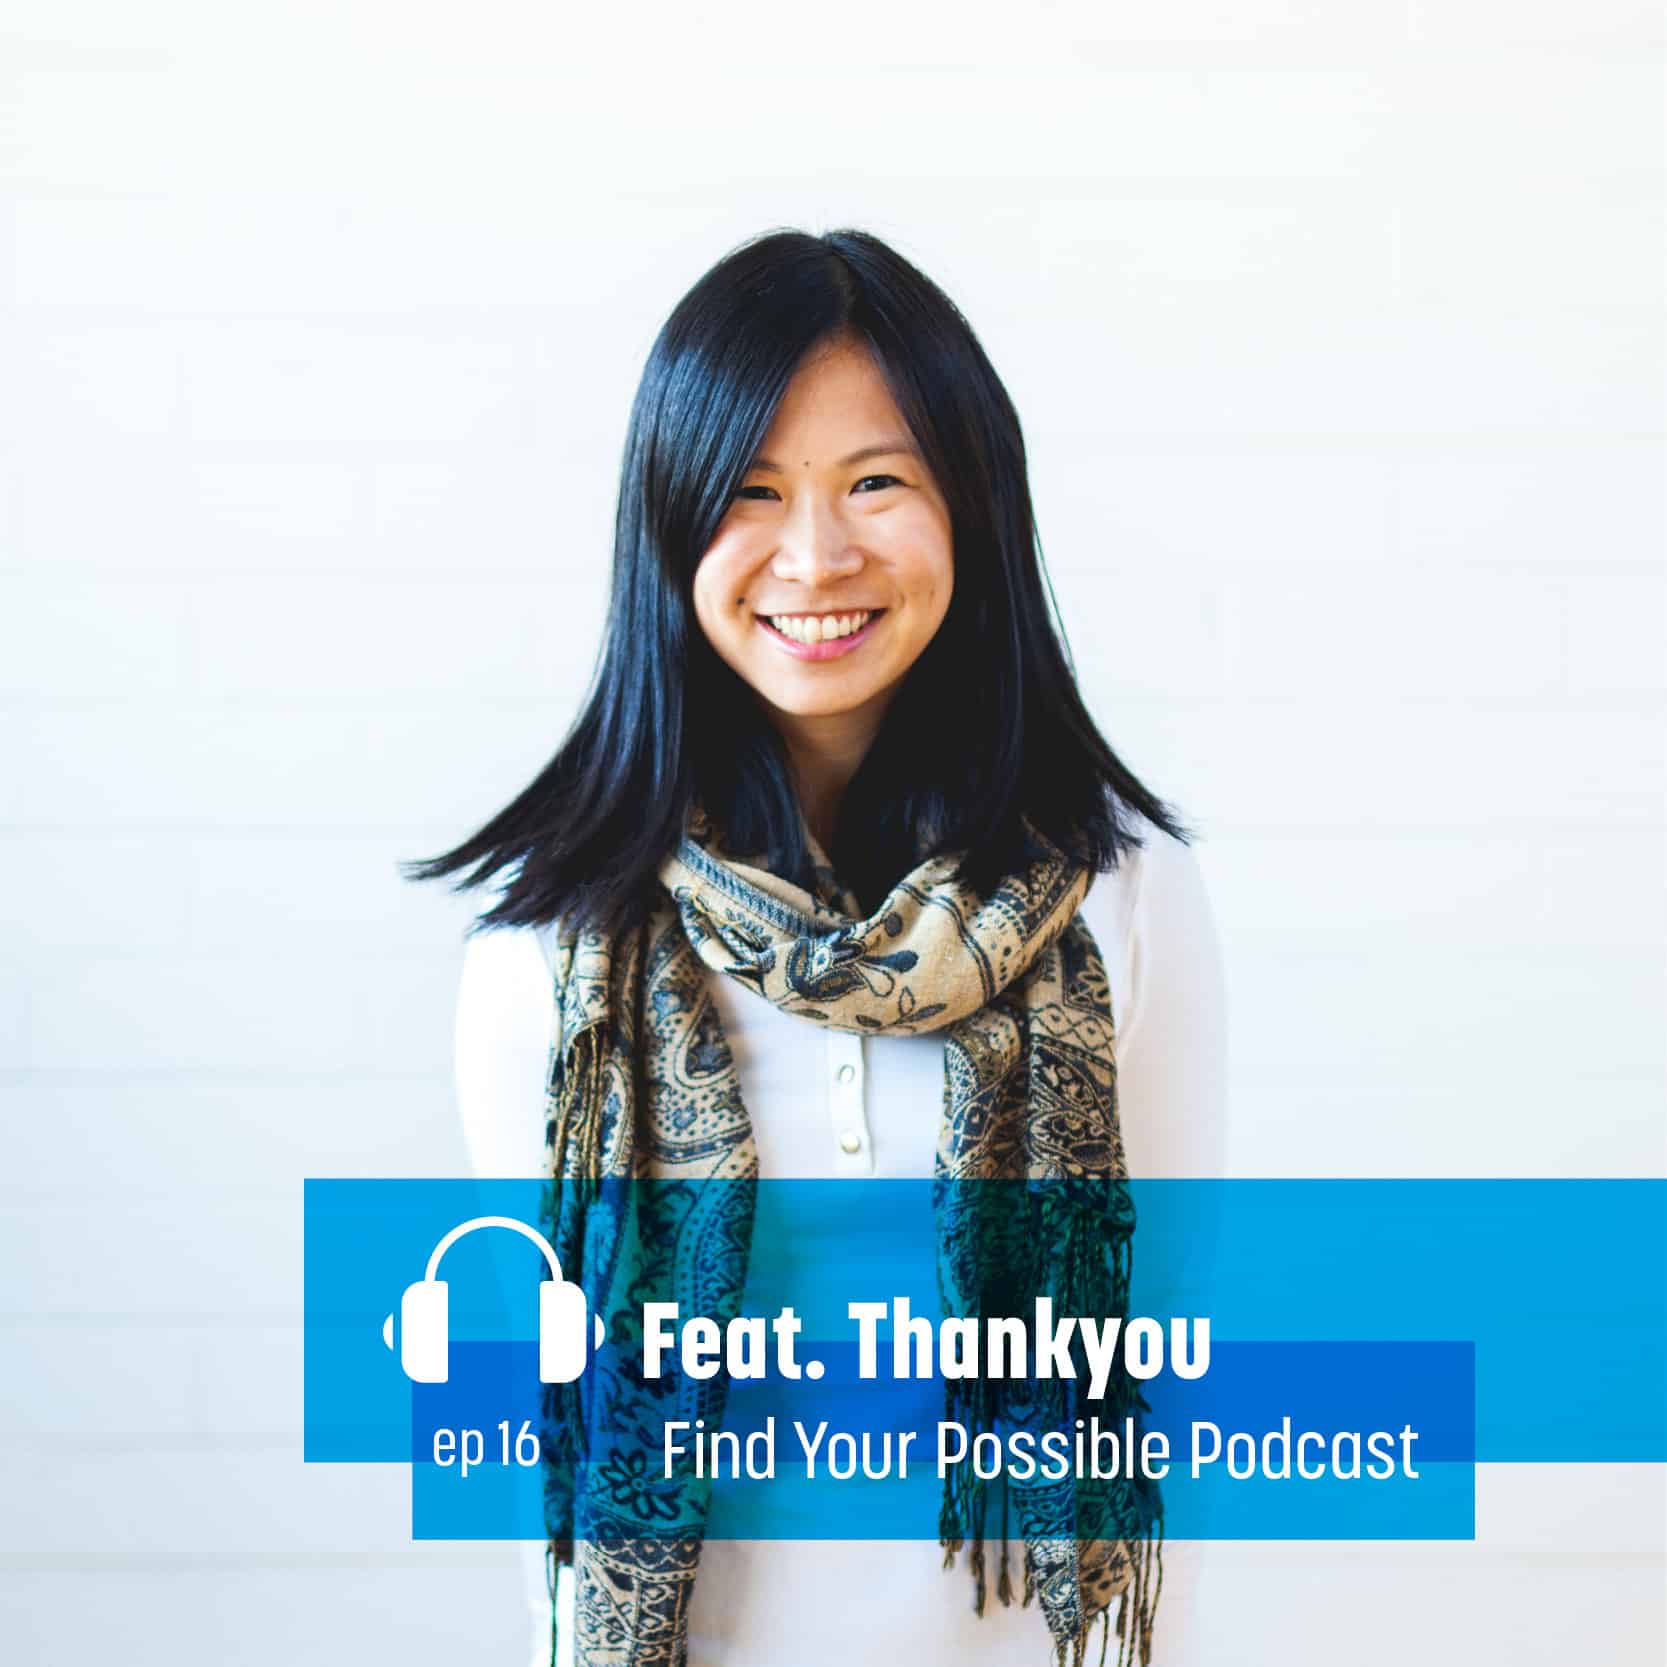 Brand Marketing Manager of Thankyou, Becky Chua, Mezzanine Find Your Possible Podcast EP16